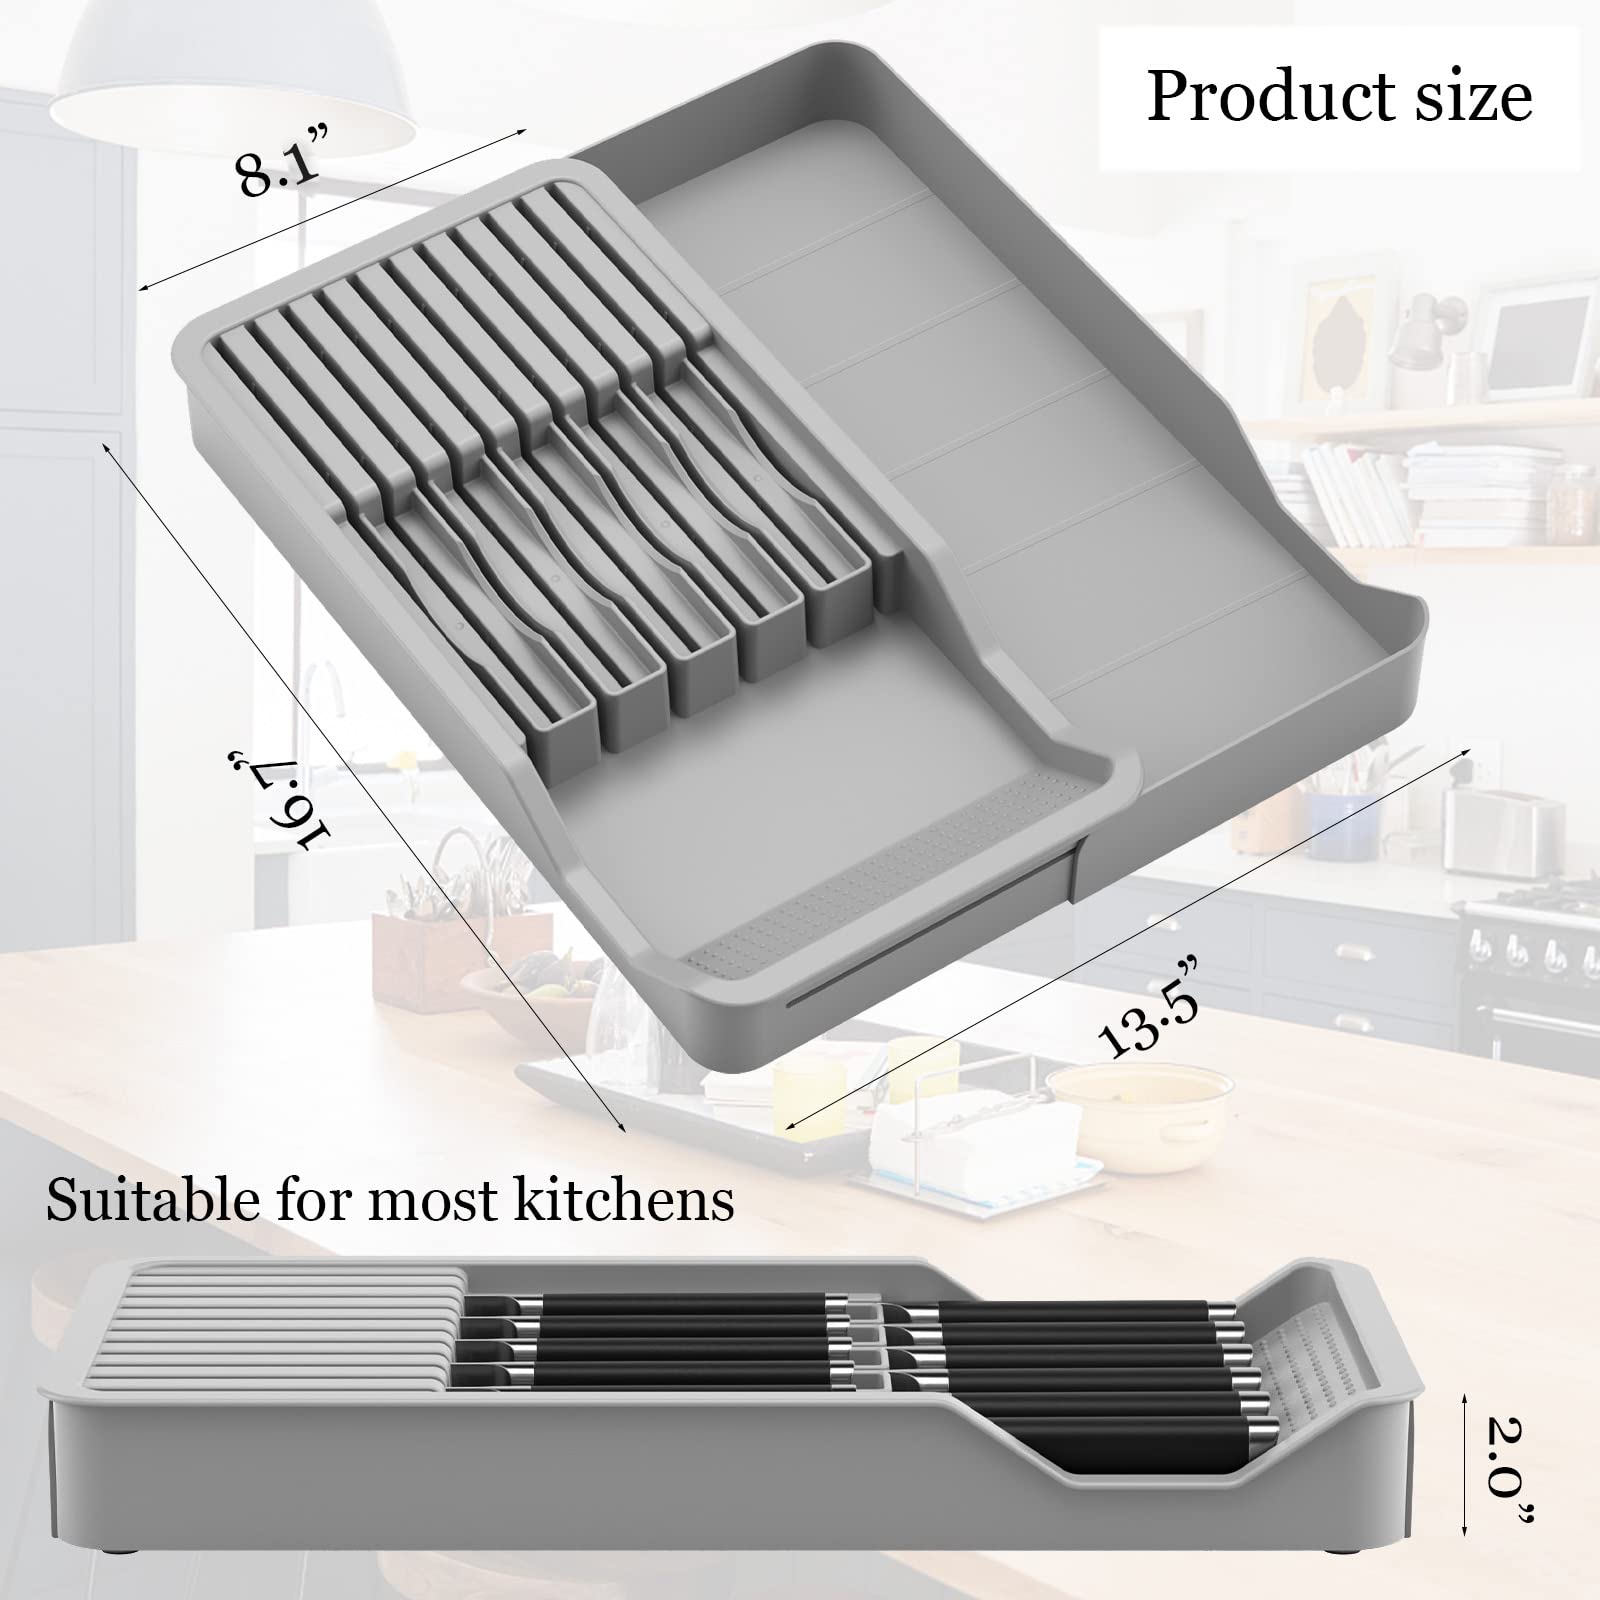 Mulikeer Knife Holder, In Drawer Knife Block Holder with Expandable Cutlery Tray Kitchen Drawer Organizer Insert-Holds 11 Knives for Save Space & Kitchen Safety (Drawer knife holder, Plastic)